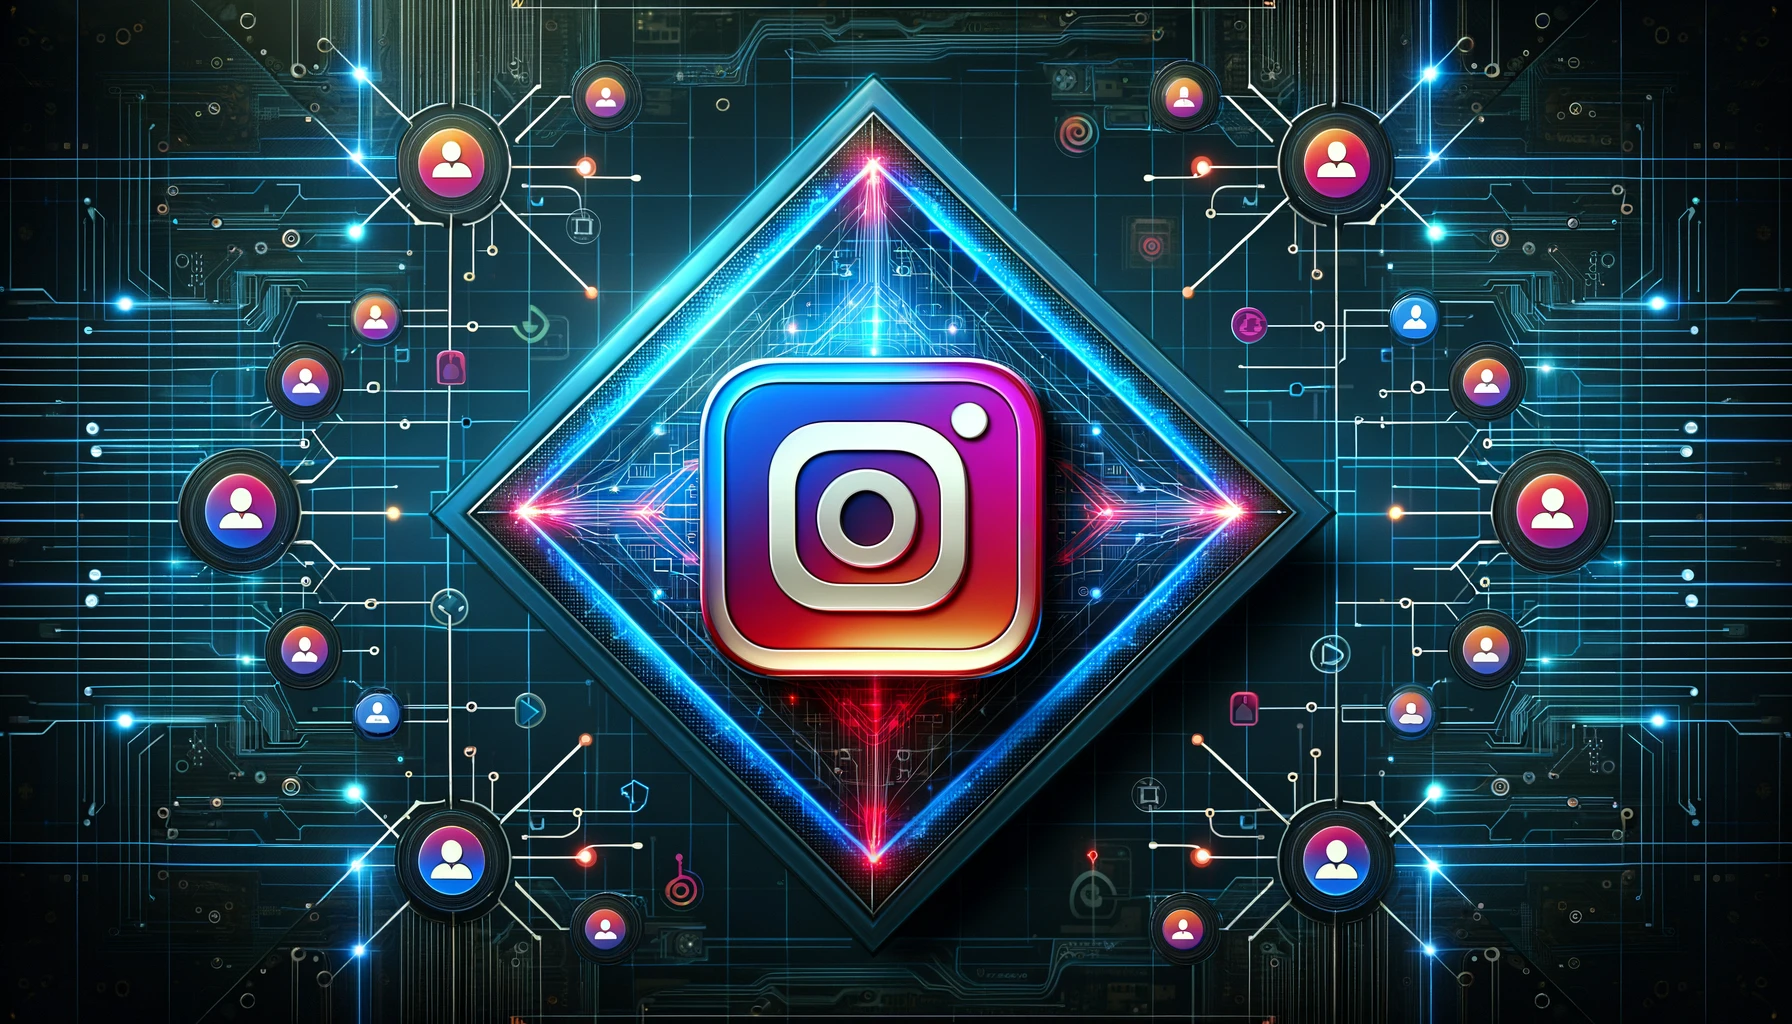 3D Instagram icon encased in a glowing diamond on a circuit board background symbolizing digital connectivity.